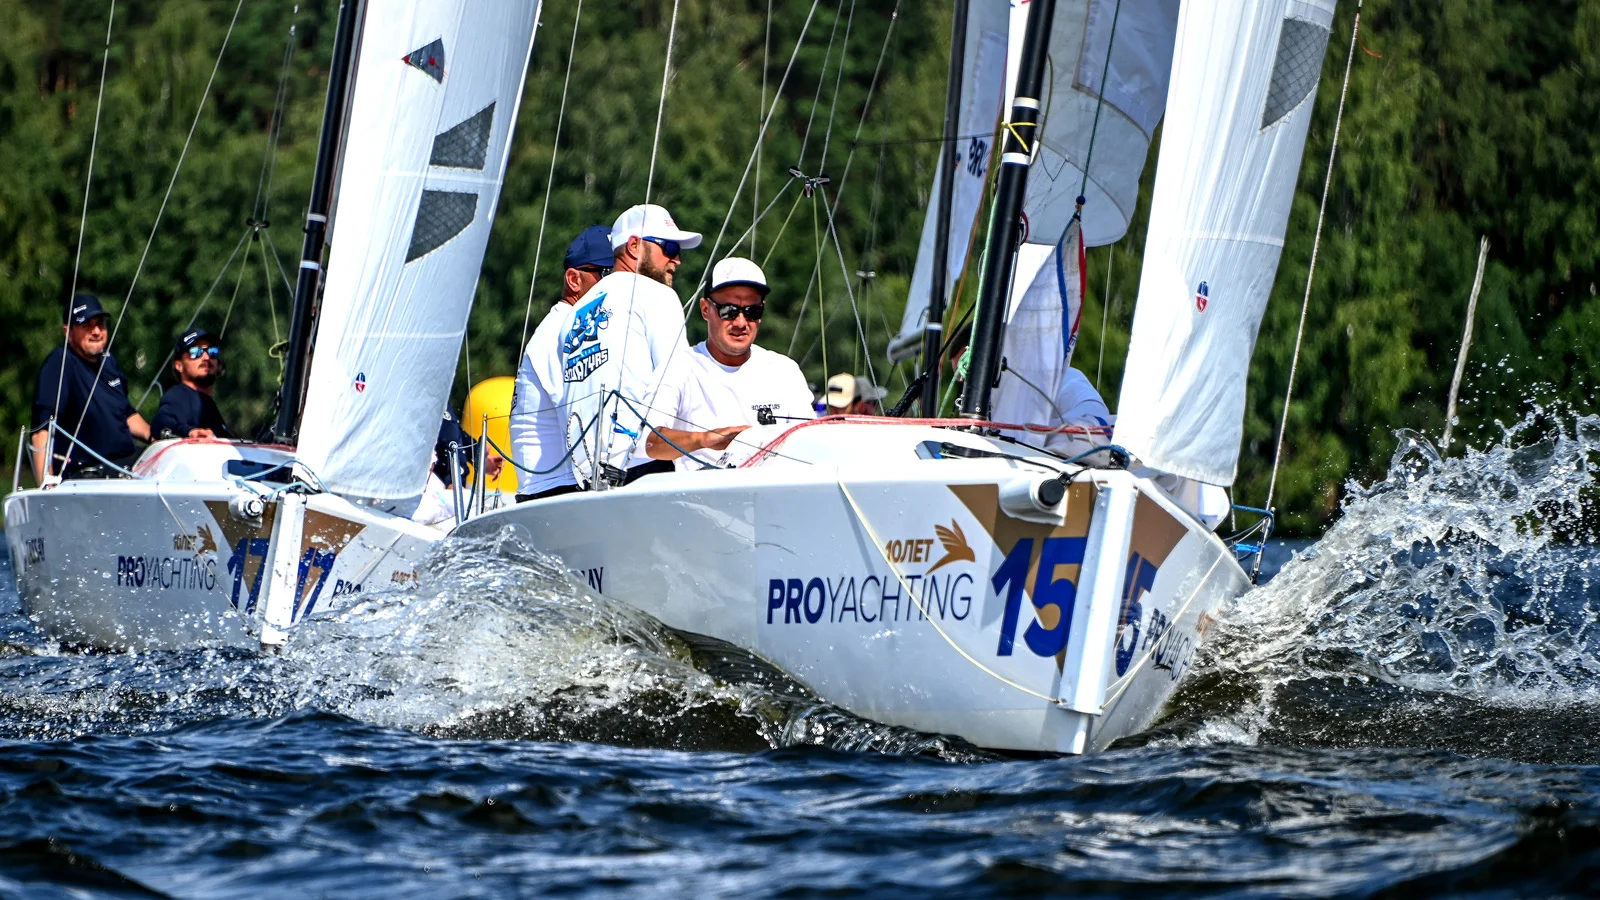 Both amateurs and professionals can take part in PROyachting Cup